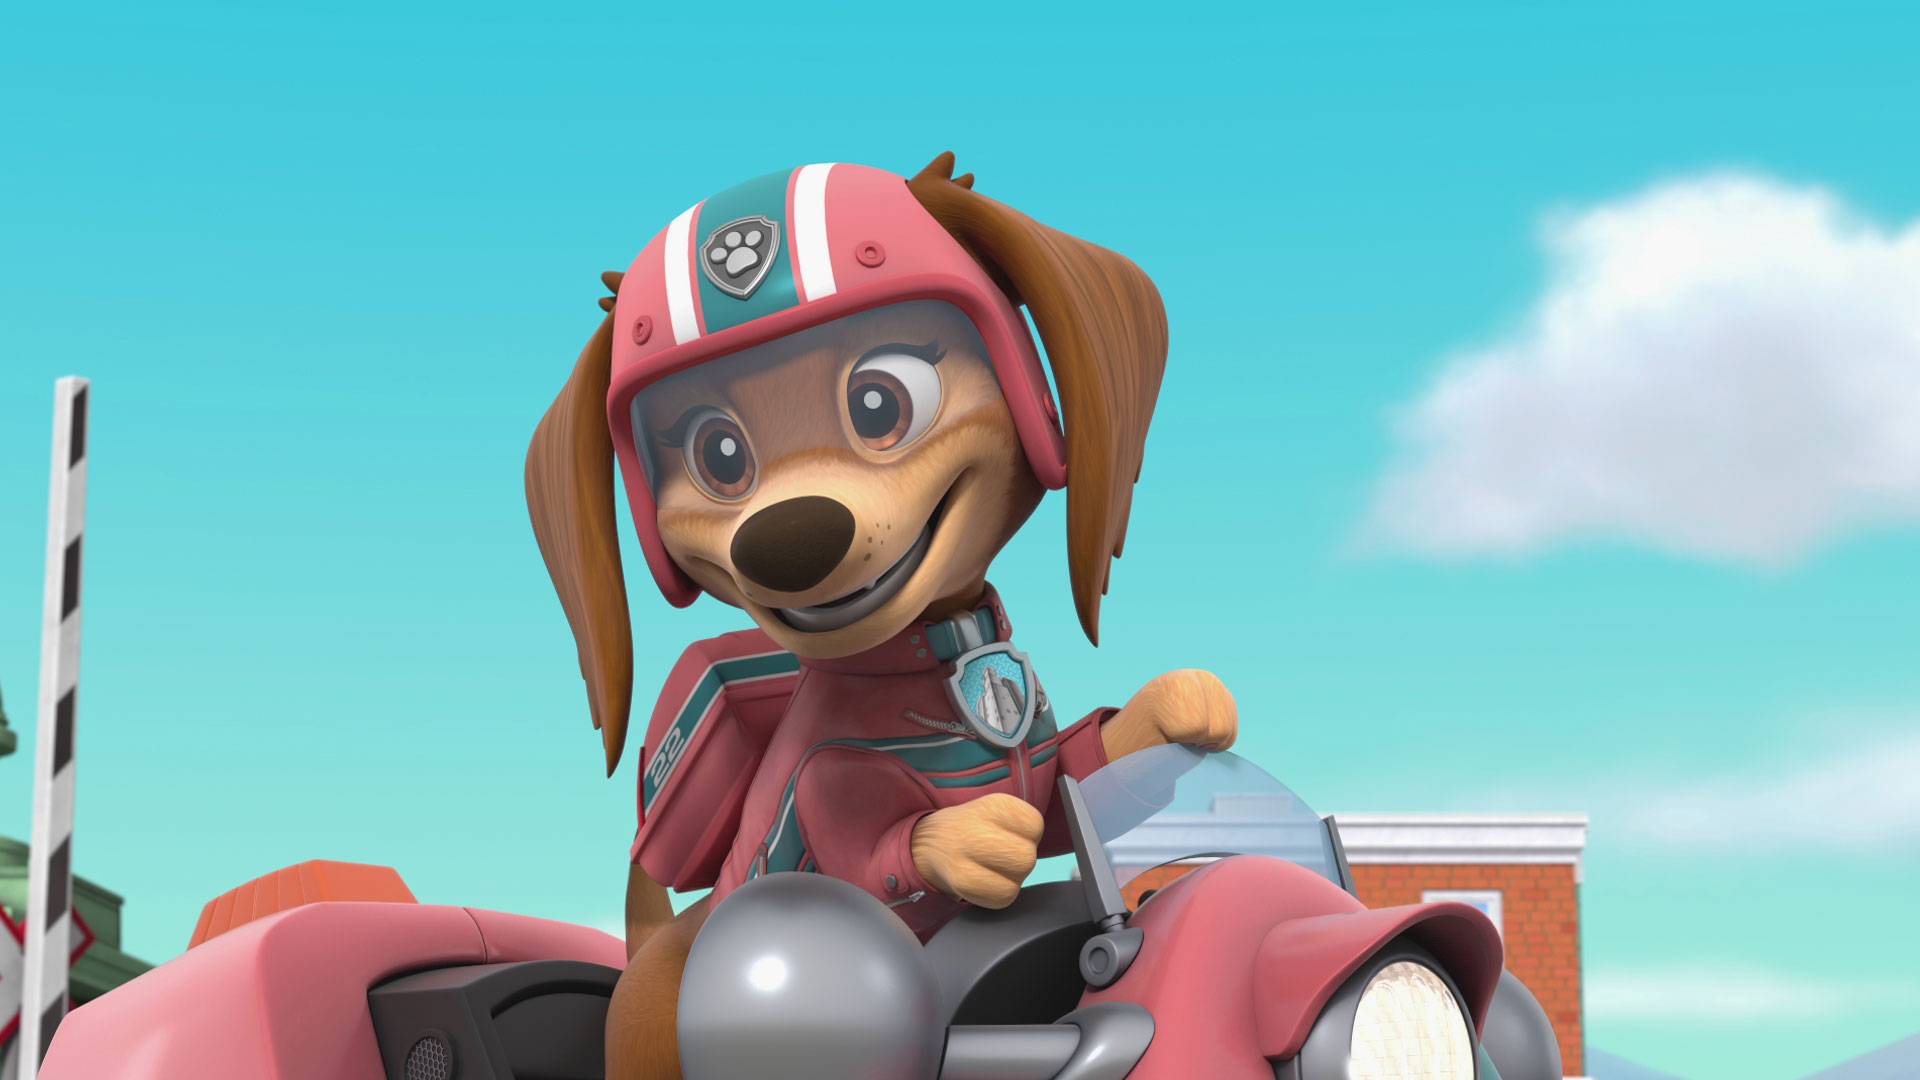 PAW Patrol Ep. 1 Makes A New Friend Pups Save The Pup Pup Boogie Contest Episode. Nick Jr. US